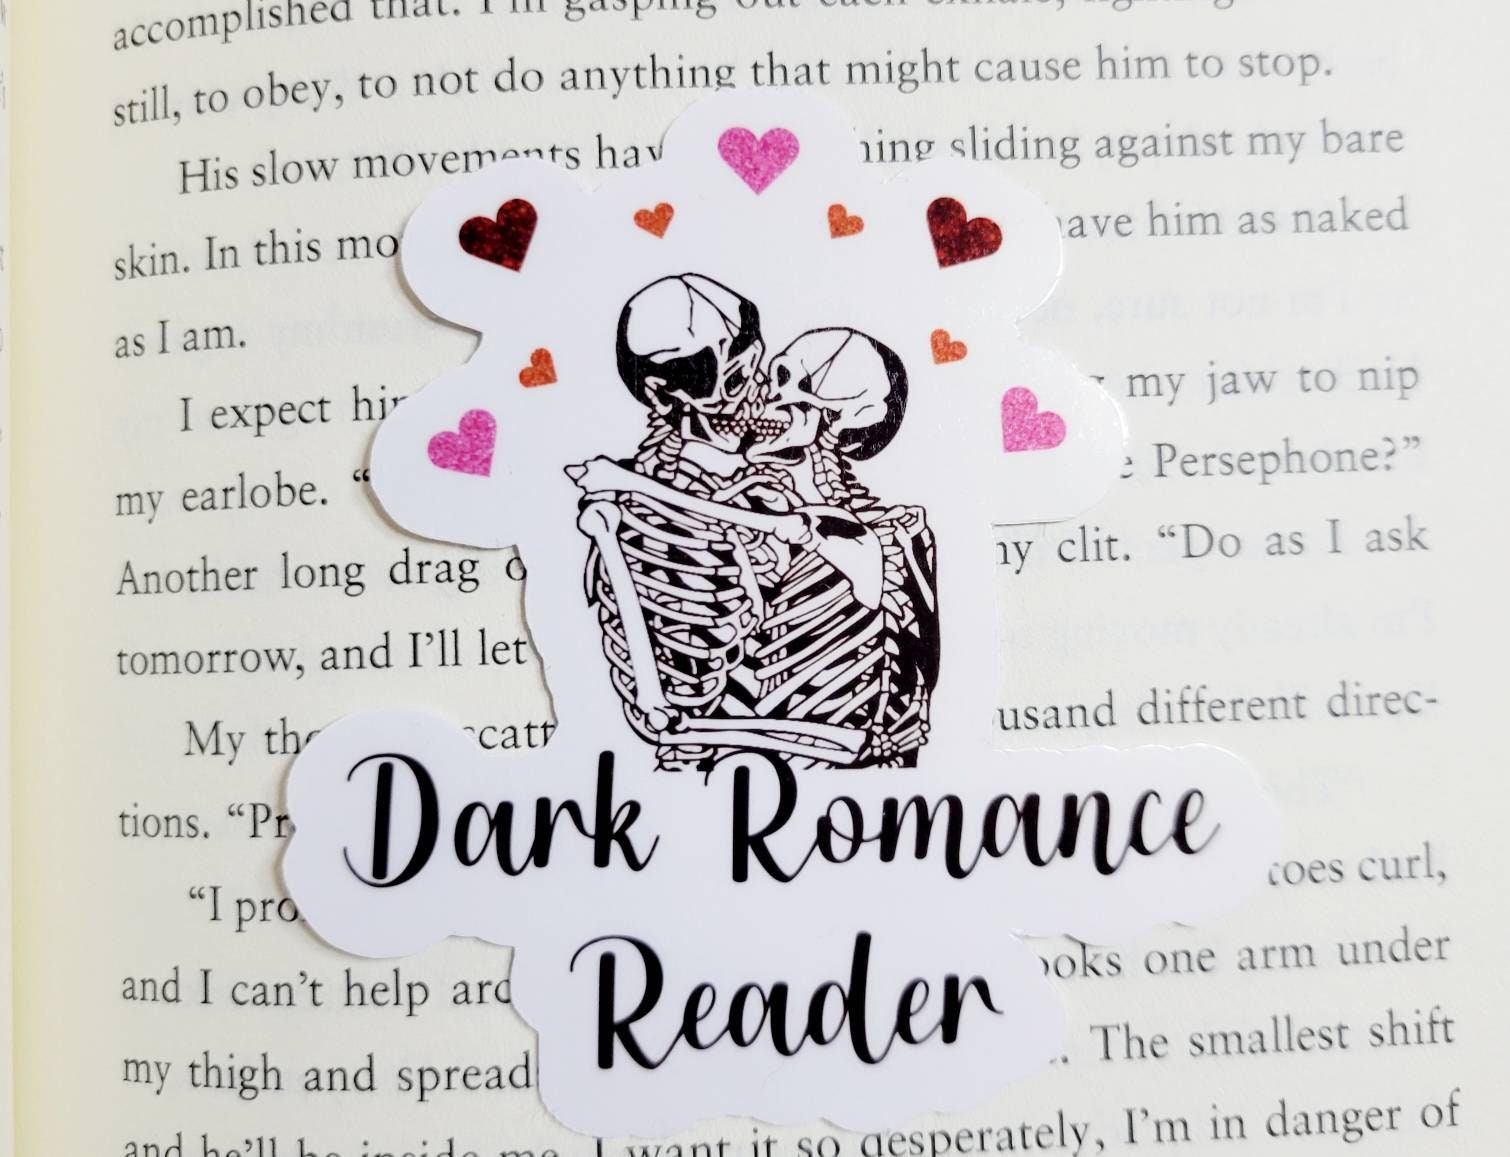 50pcs Dark Romance Reader Stickers For Personalized Decoration Of